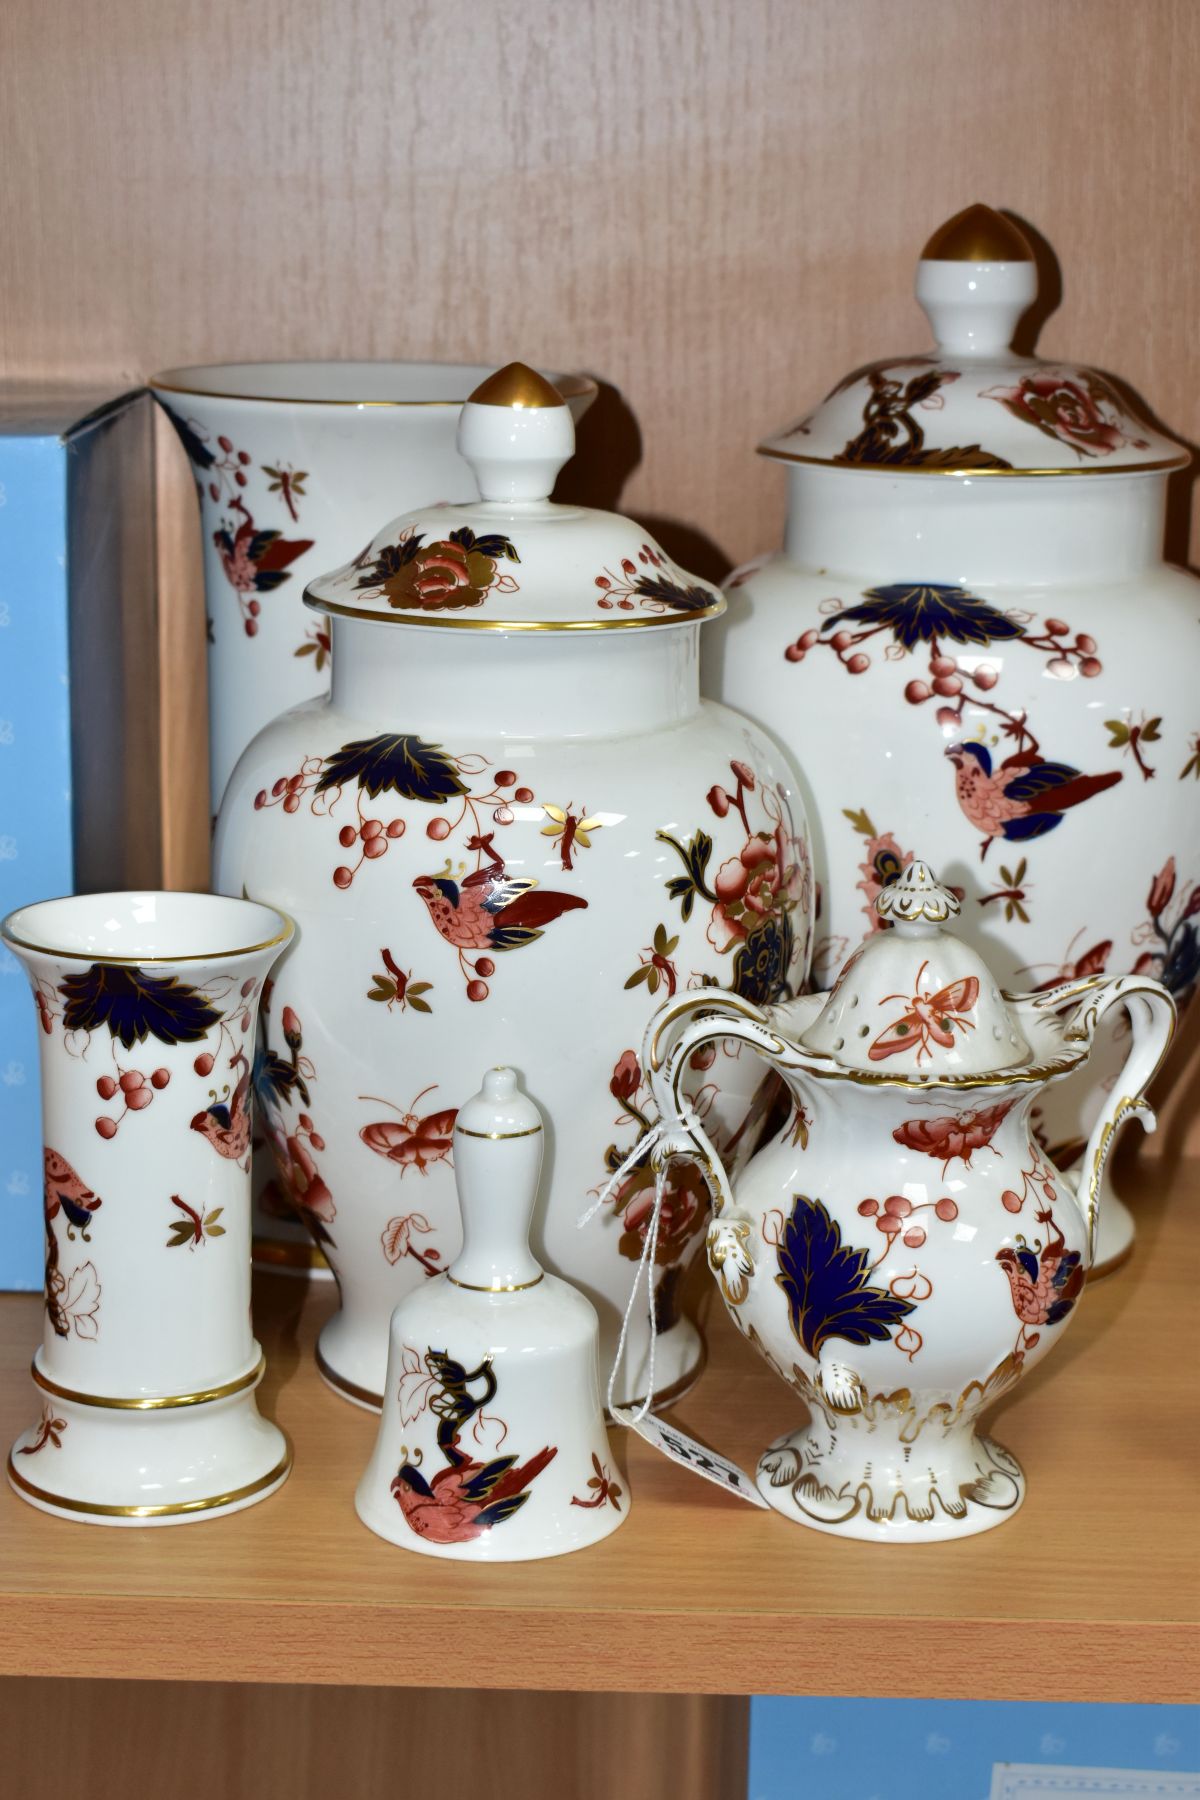 SIX PIECES OF COALPORT HONG KONG CERAMIC WARES, comprising two covered vases heights approximately